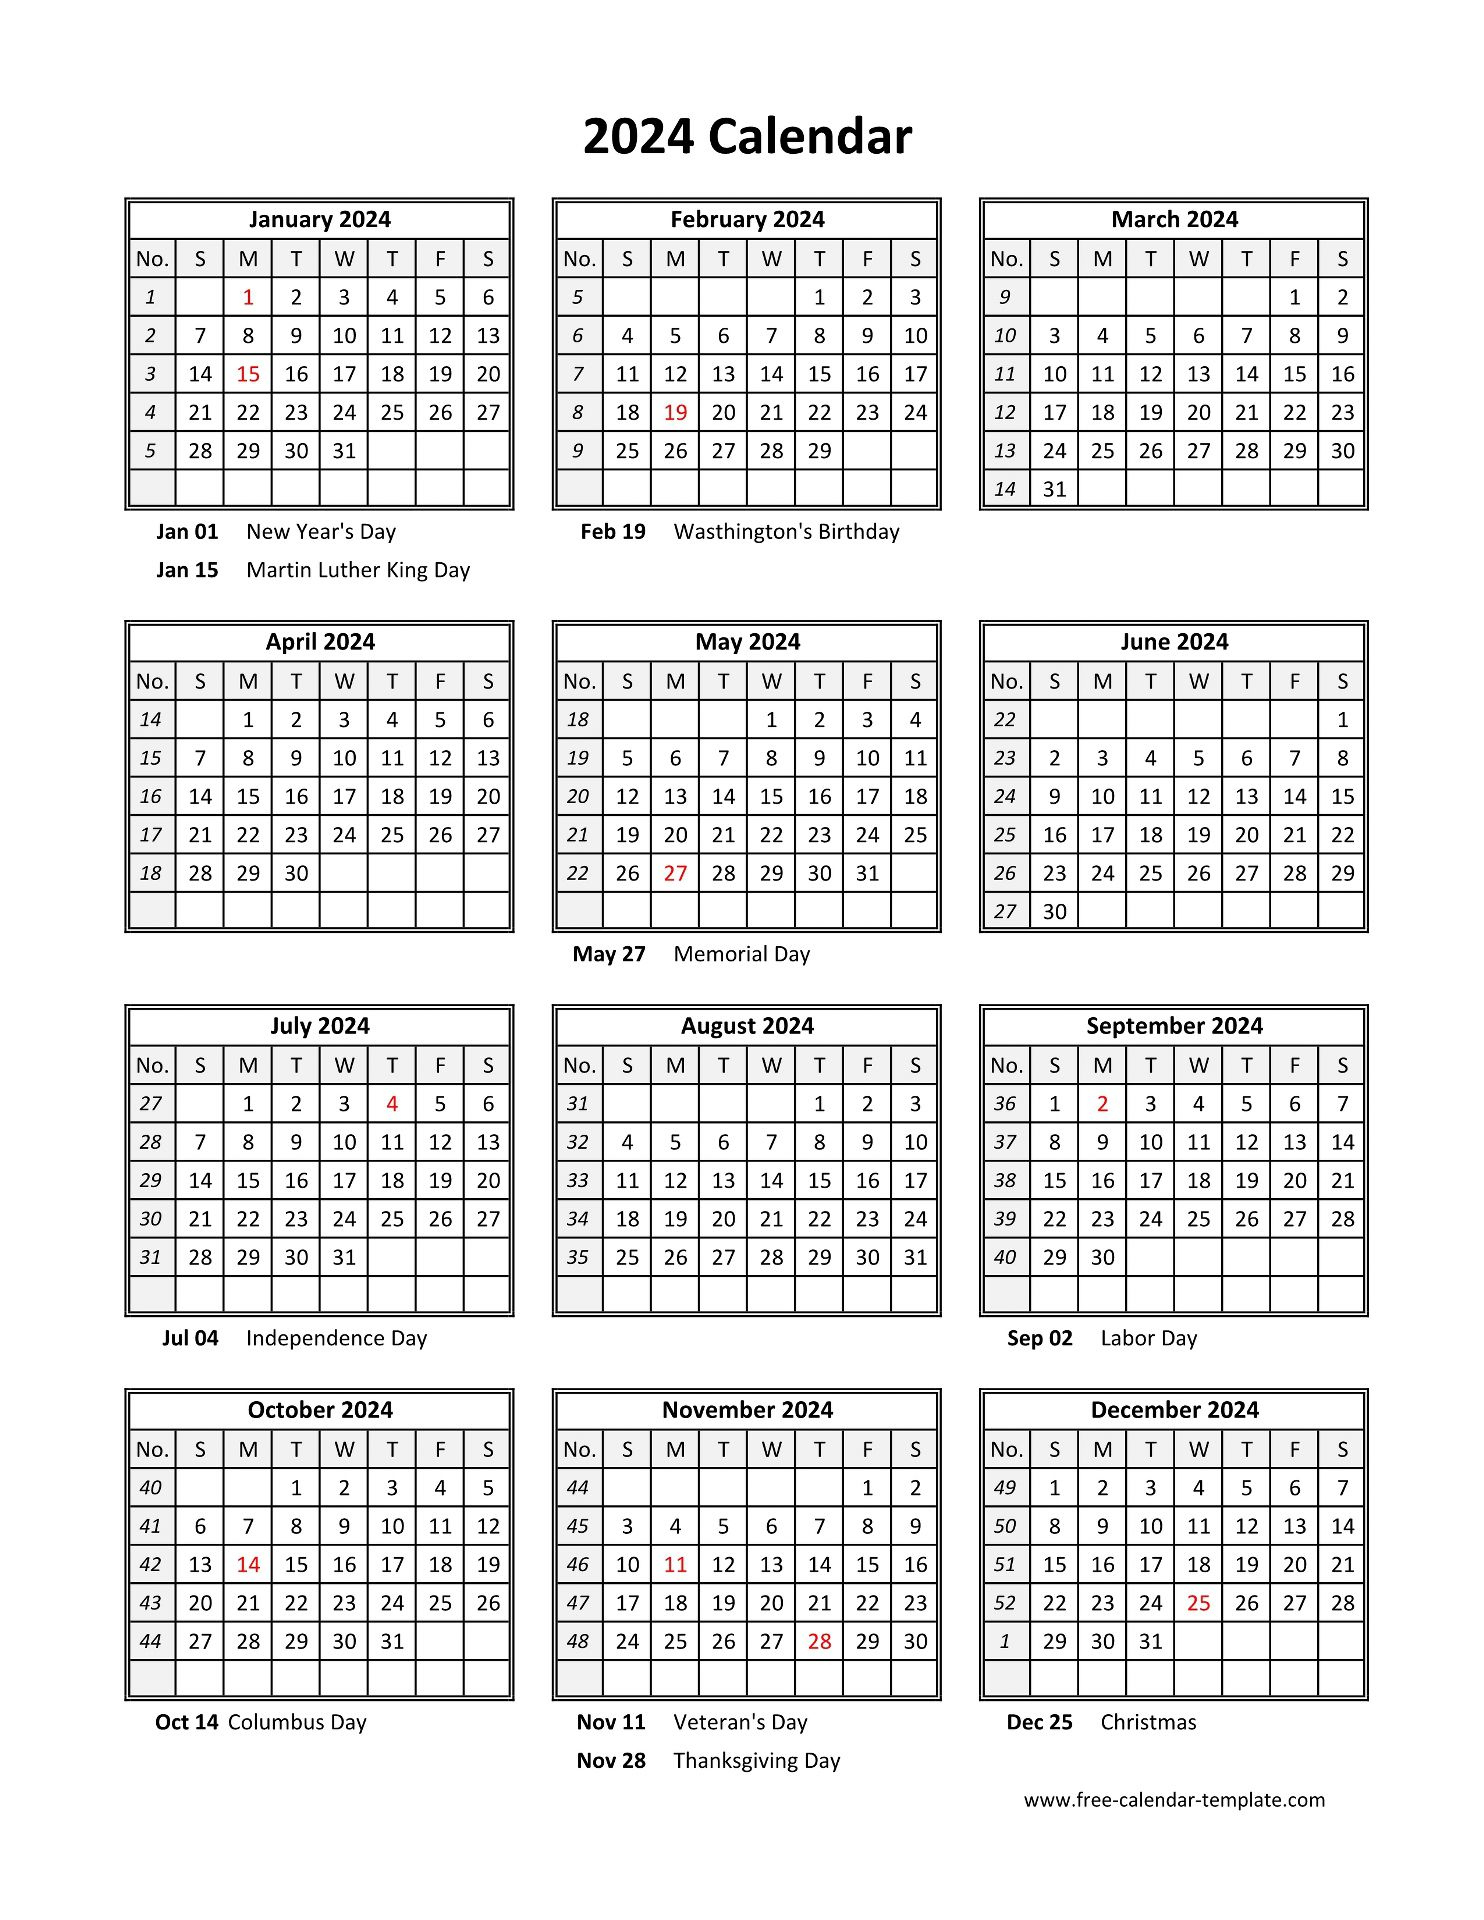 Yearly Printable Calendar 2024 With Holidays | Free-Calendar | Free Printable 2024 Calendar One Page Pdf